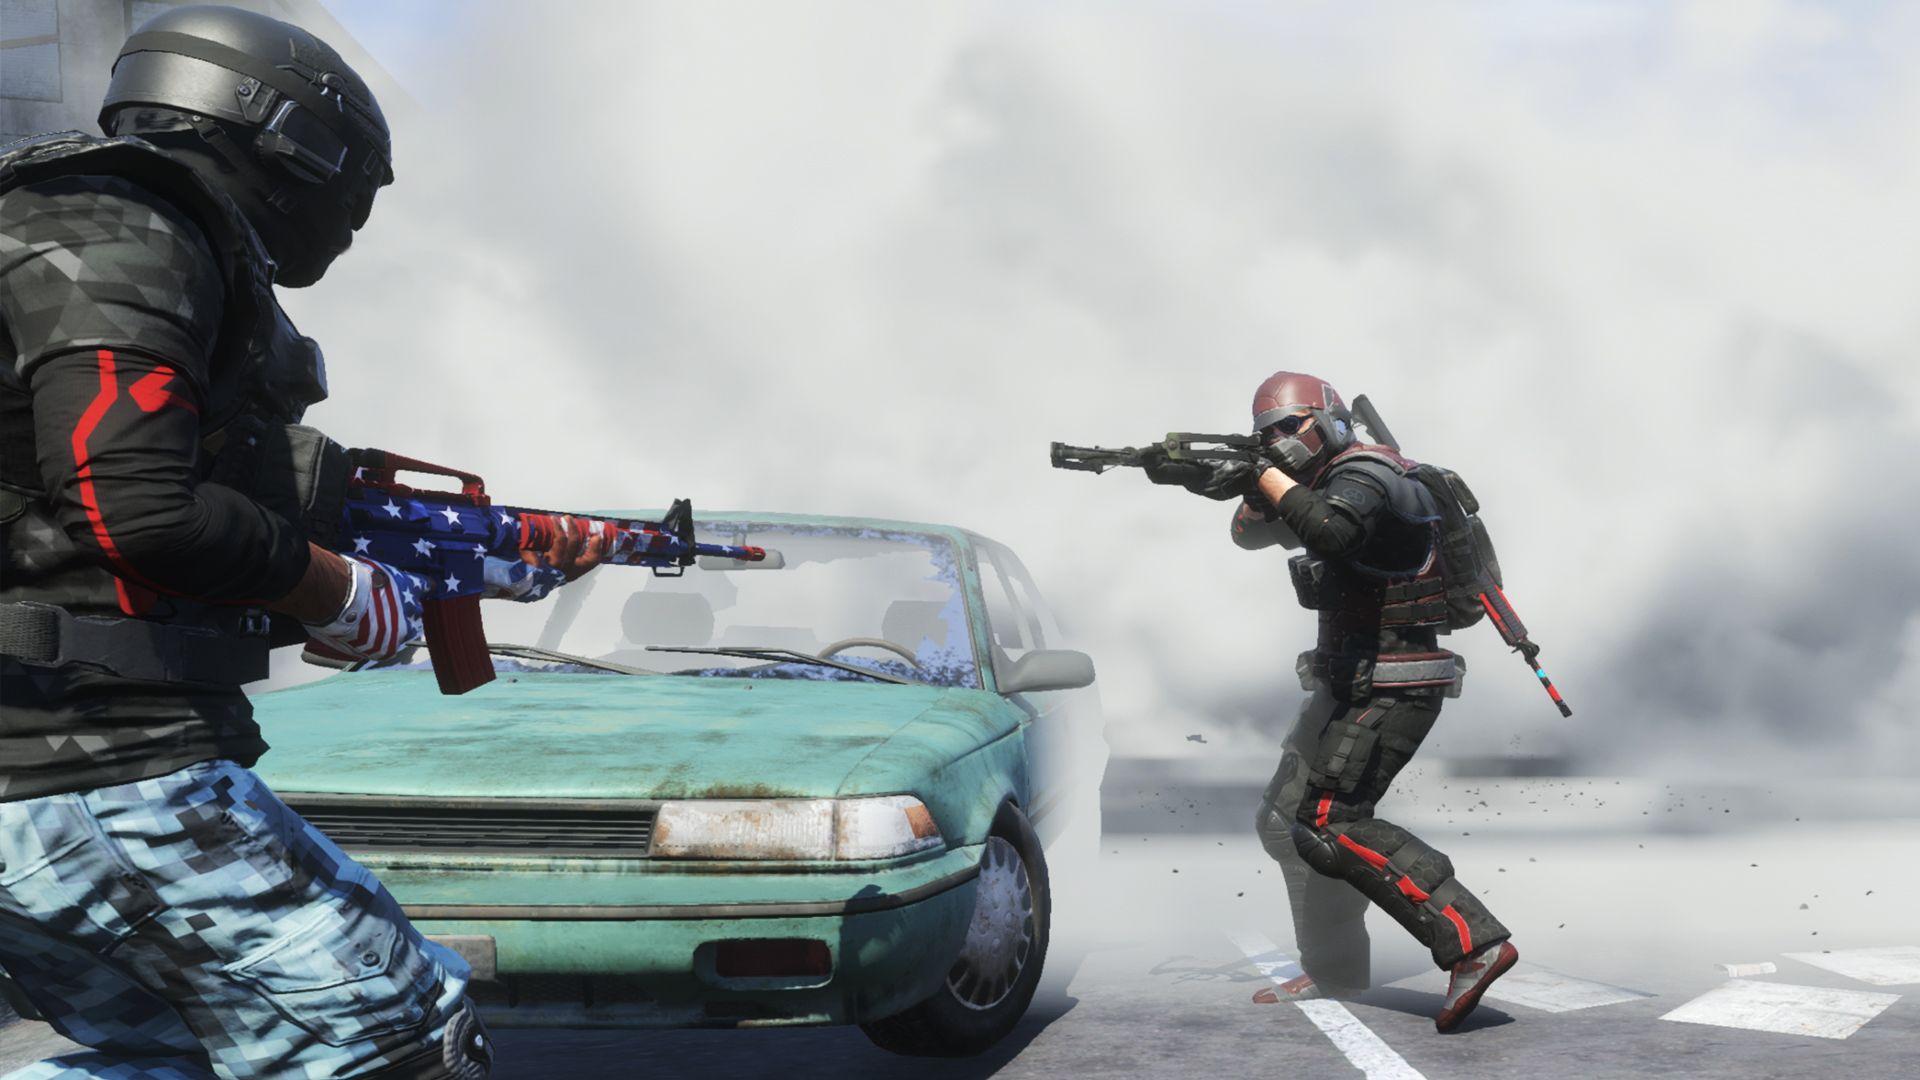 H1Z1 Battle Royale Open Beta Available For Free on PS4